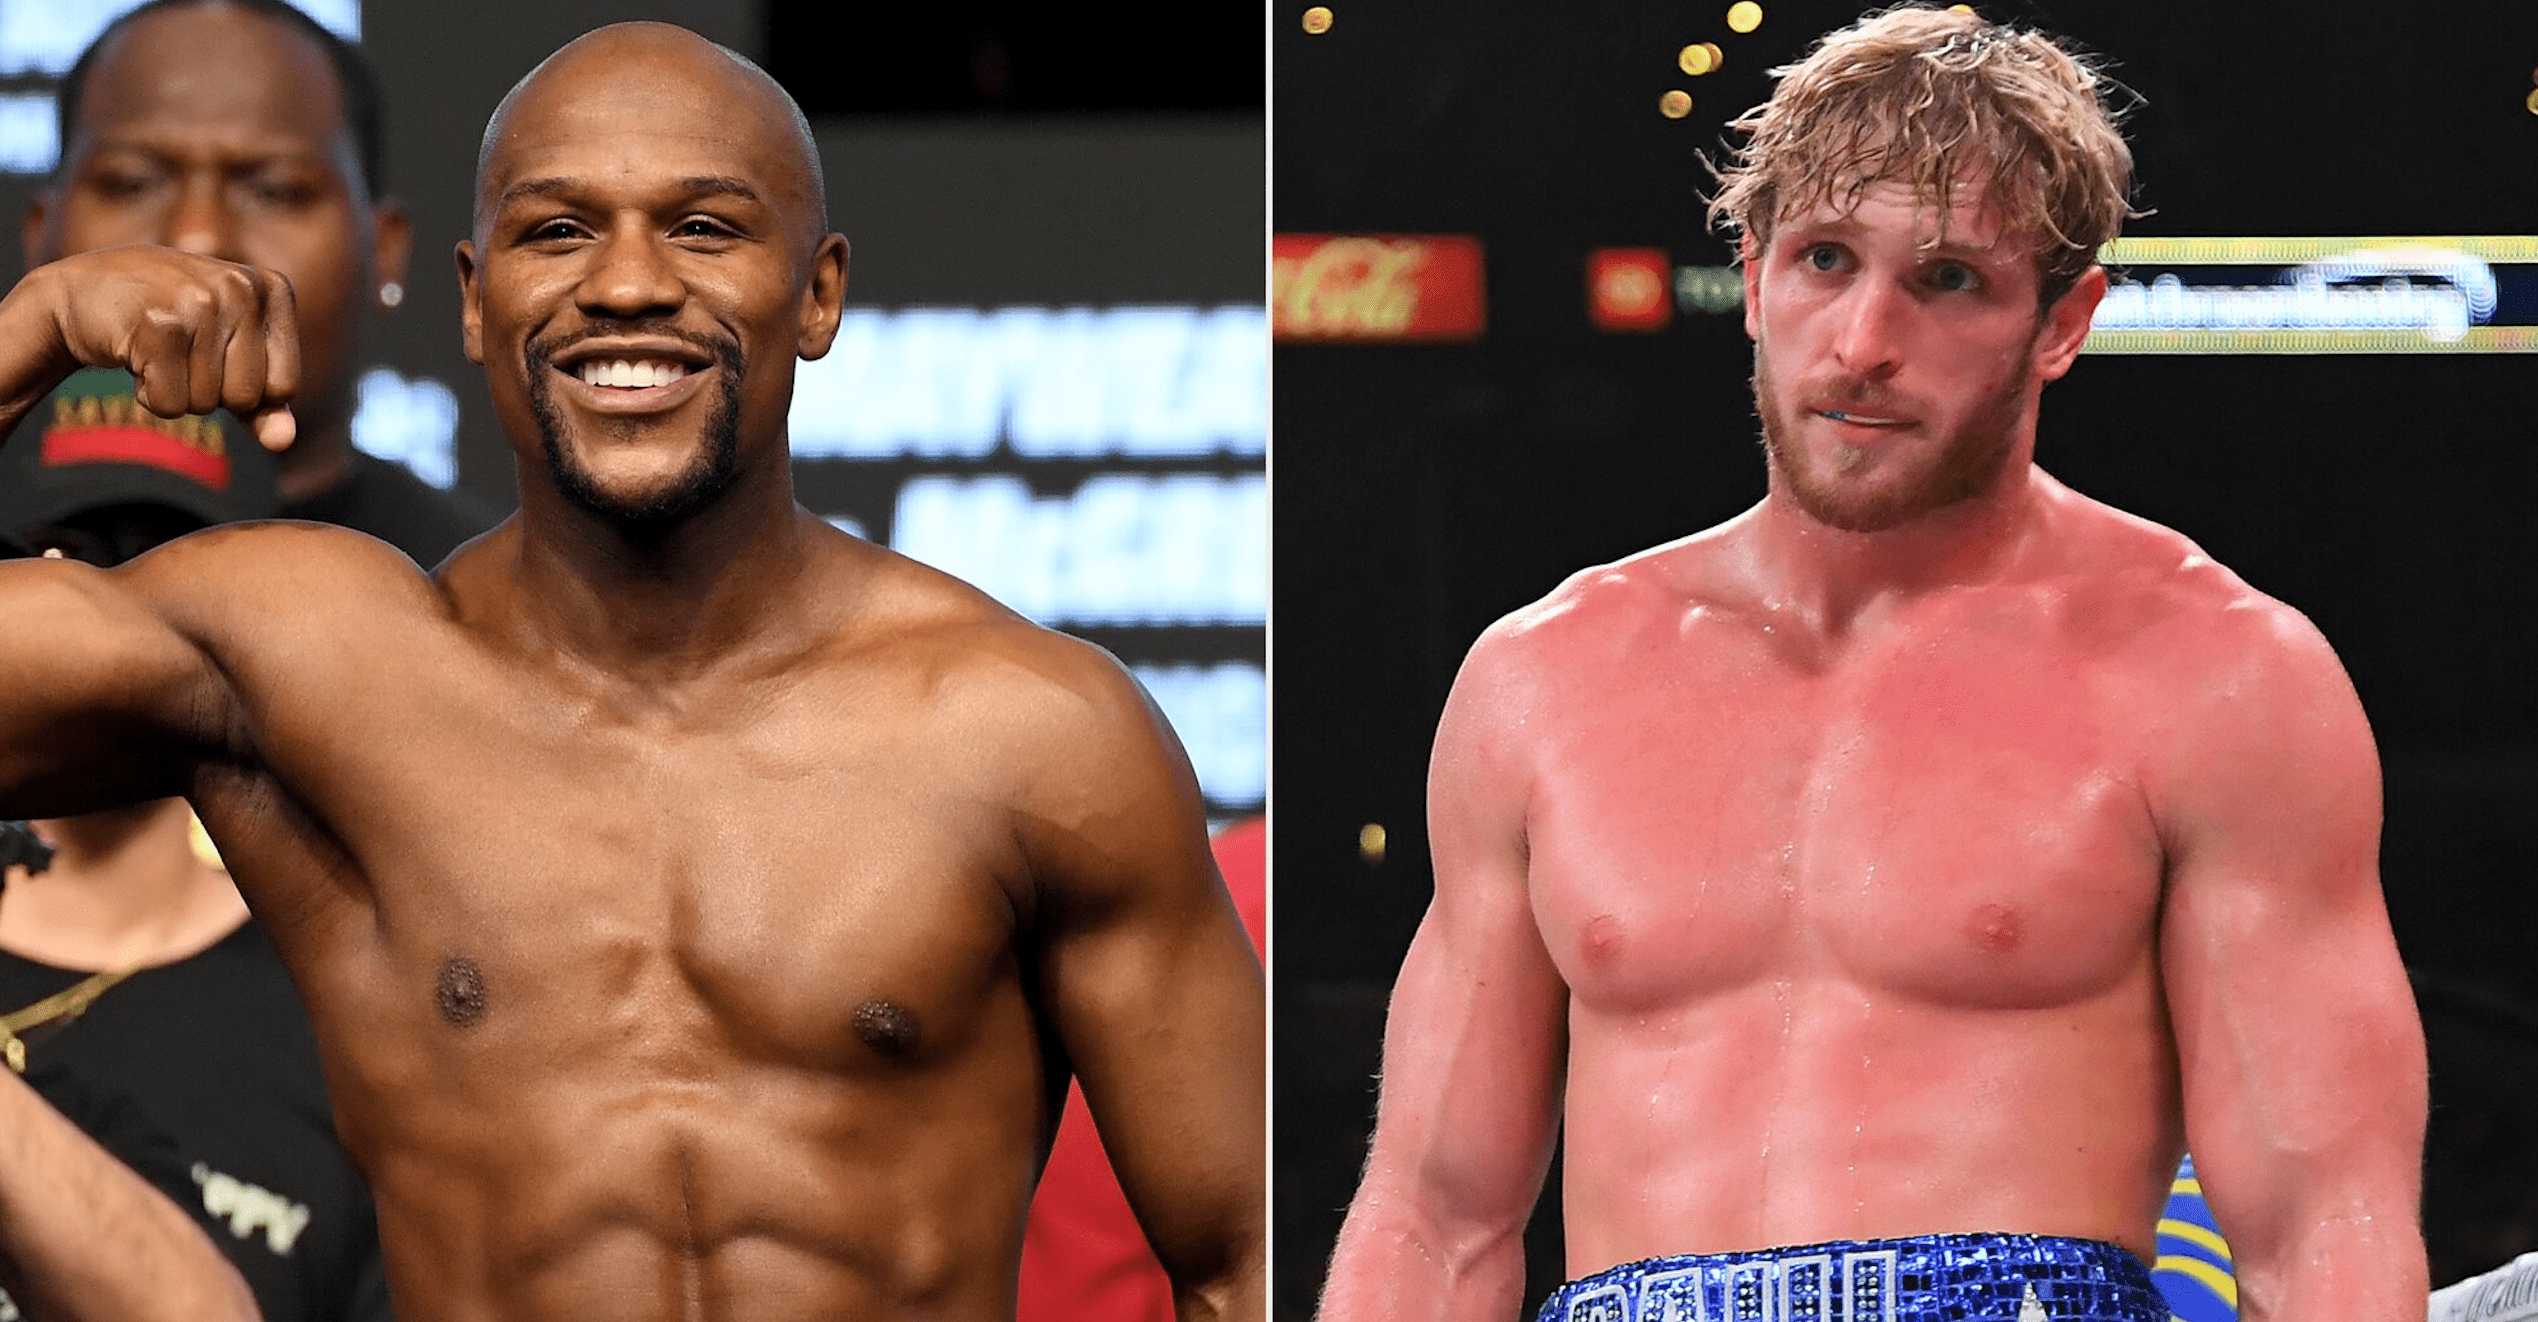 Logan Paul Says He’ll KO Floyd Mayweather, While ‘Money’ Expects Easy Payday